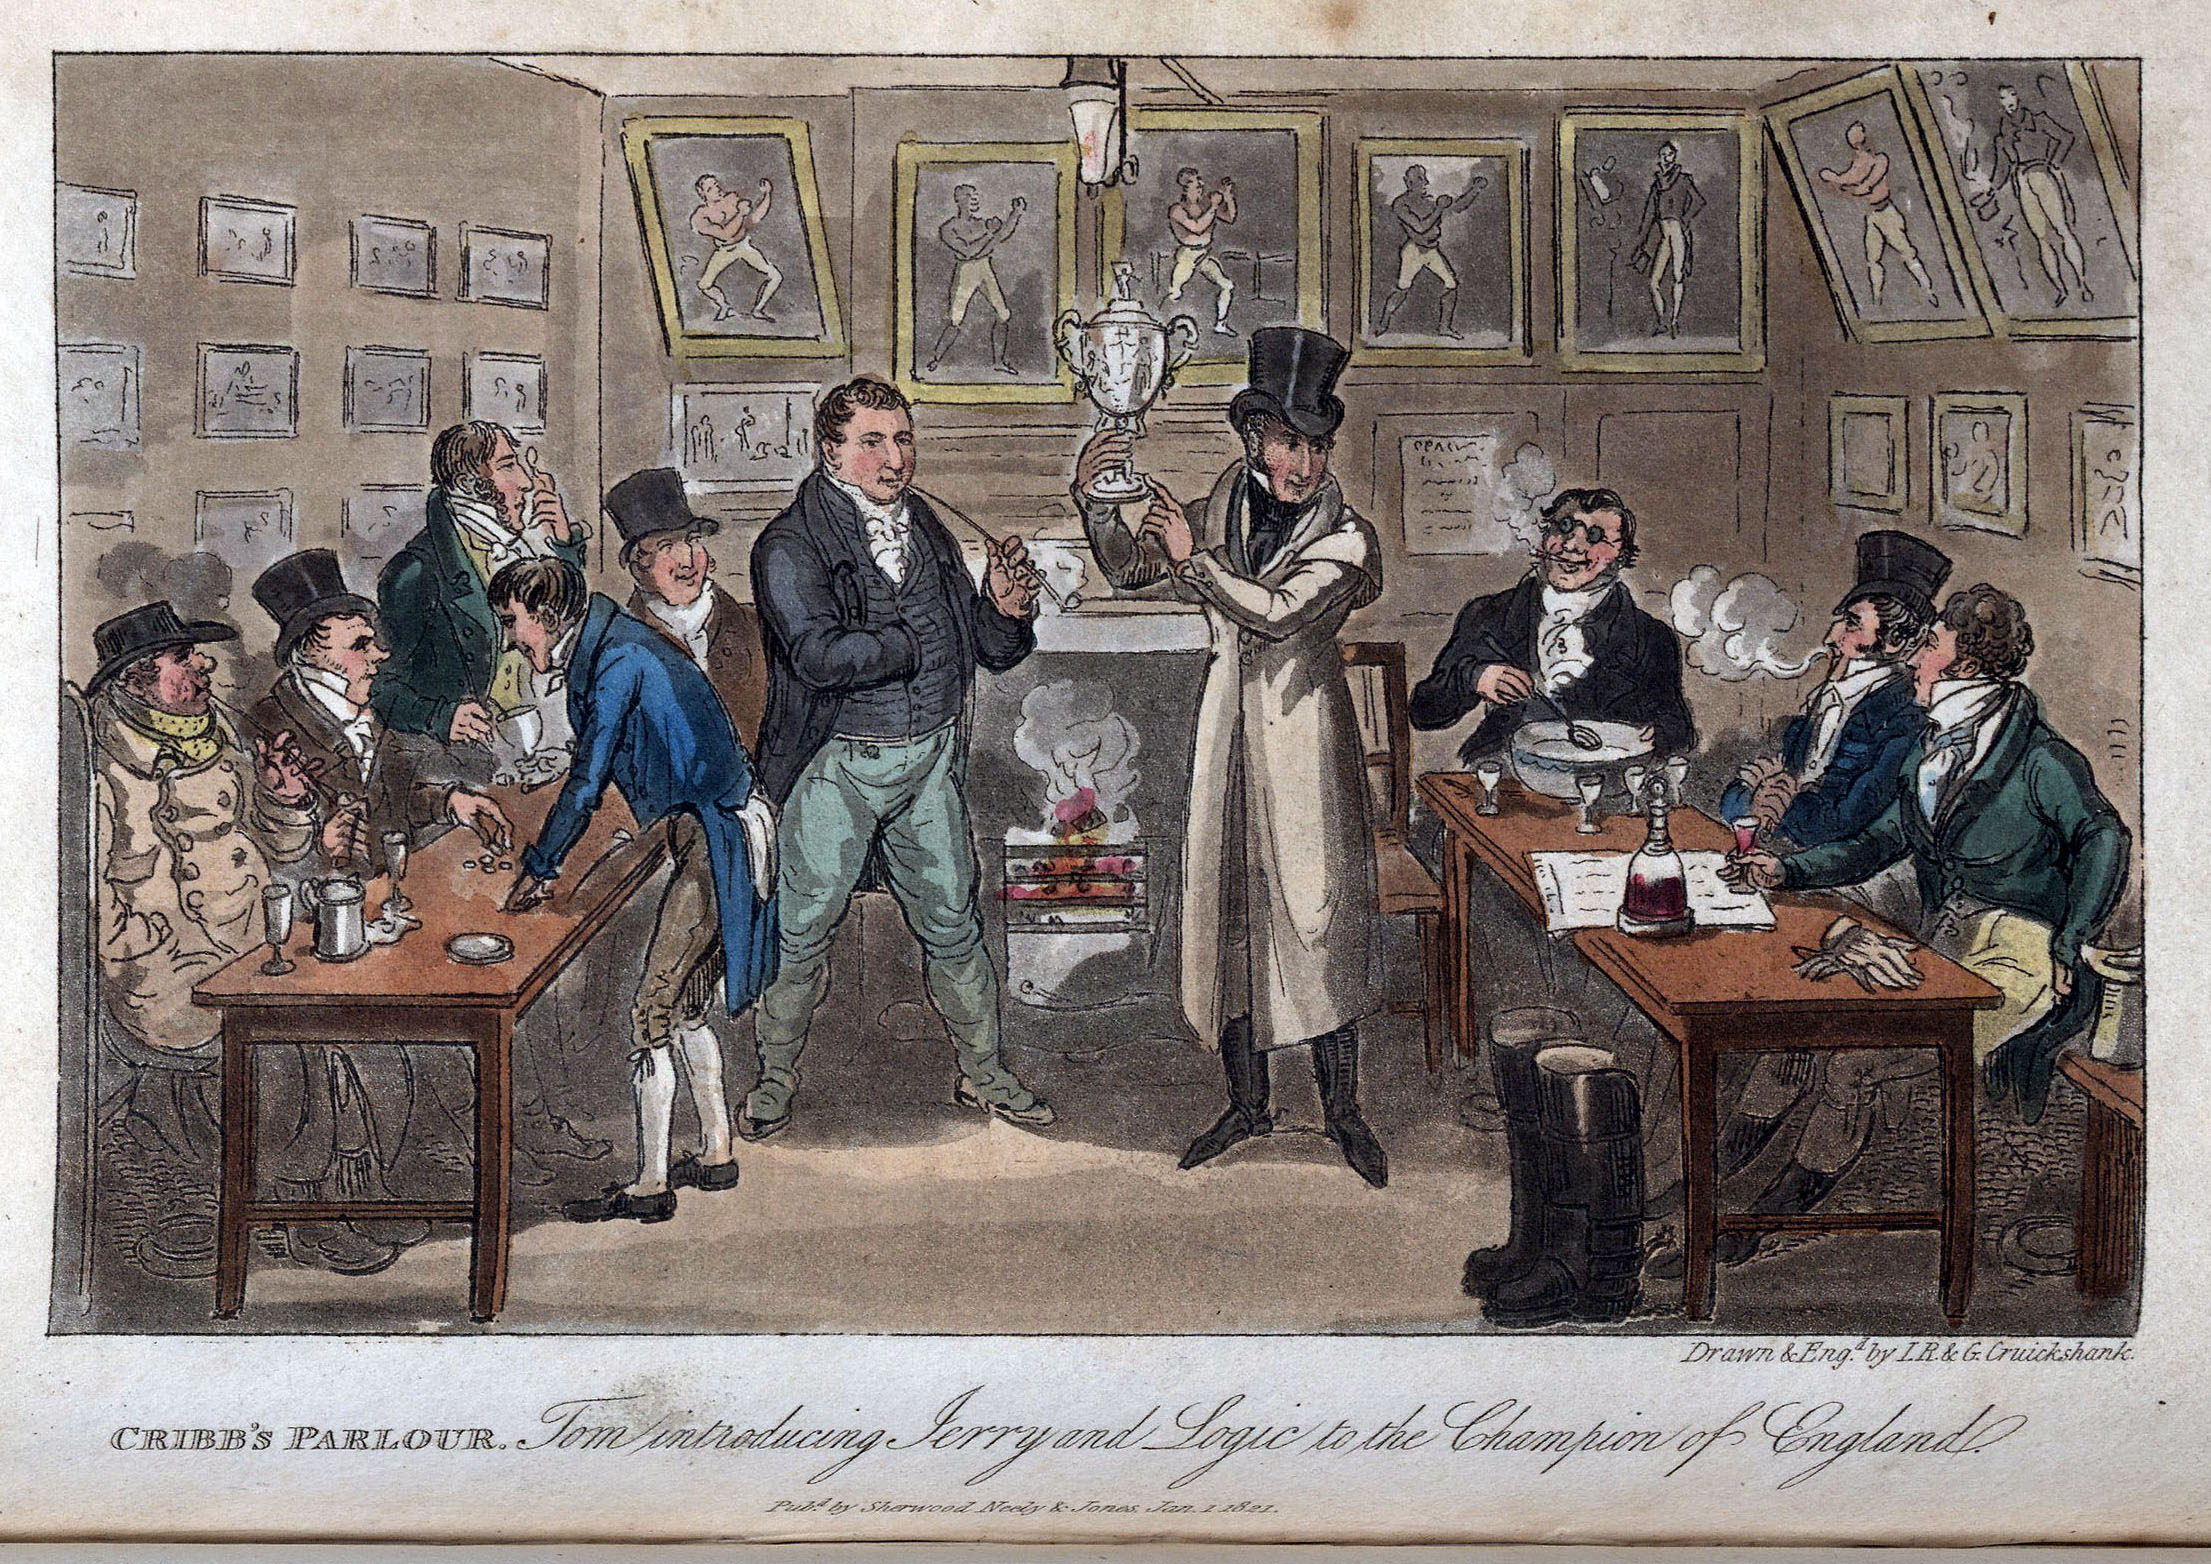 10 - Cribb's Parlour - Tom introducing jerry and Logic to the Champion of England